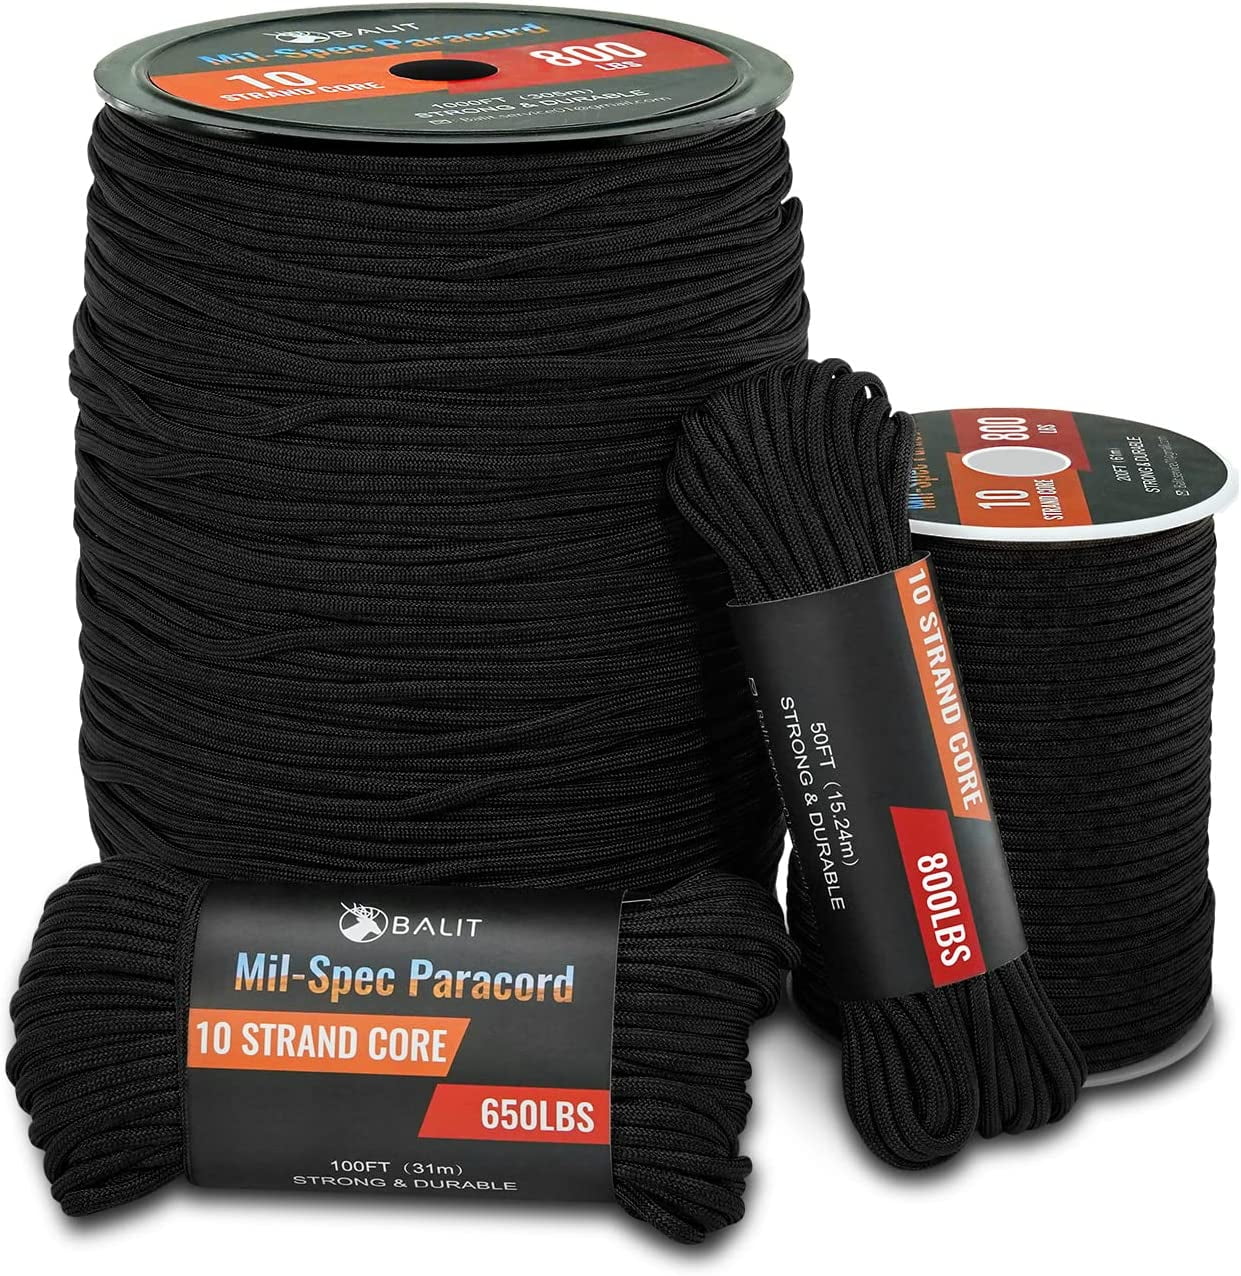 Balit 550 Paracord/Parachute Cord 100 Feet Mil-Spec Paracord 10-Strand Core 650lb Nylon Parachute for Outdoor Emergency Tactical Survival Camping Hiking Bracelet 